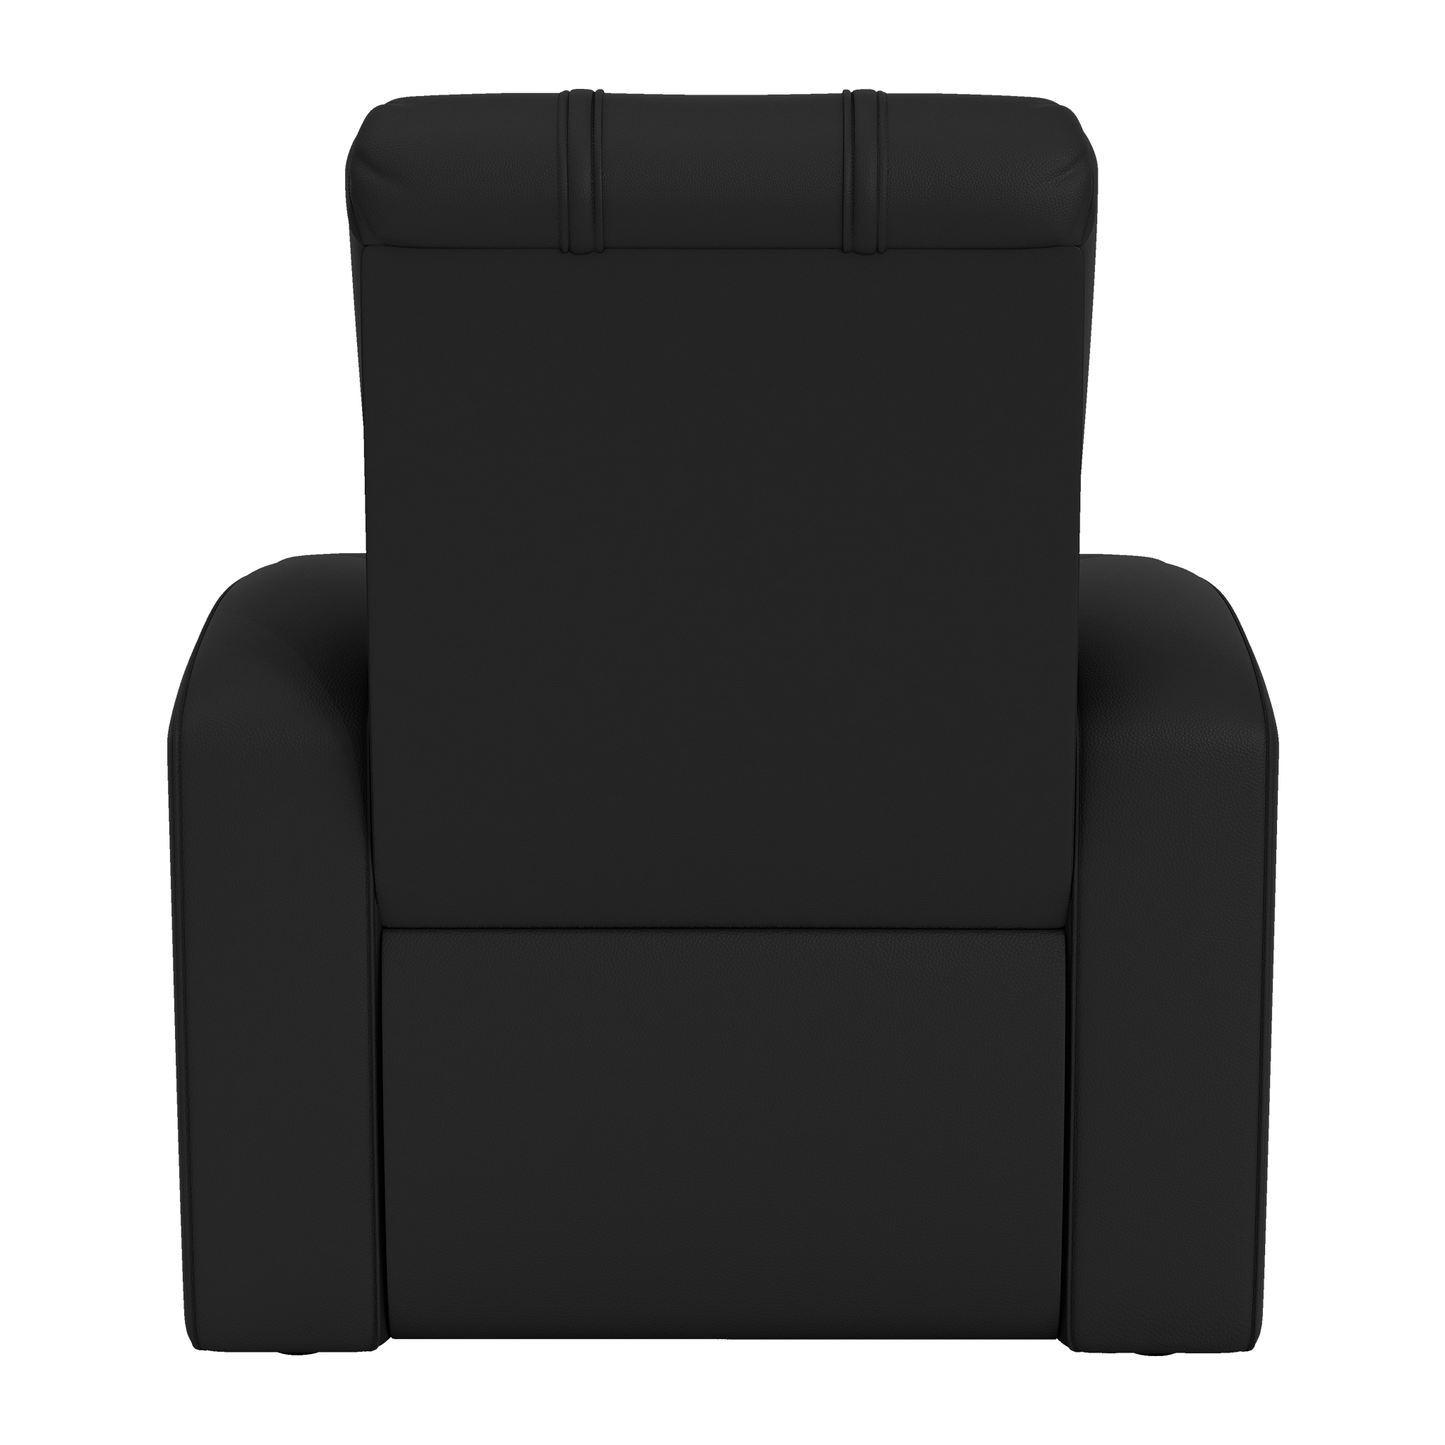 Relax Home Theater Recliner with Naughty or Nice Logo